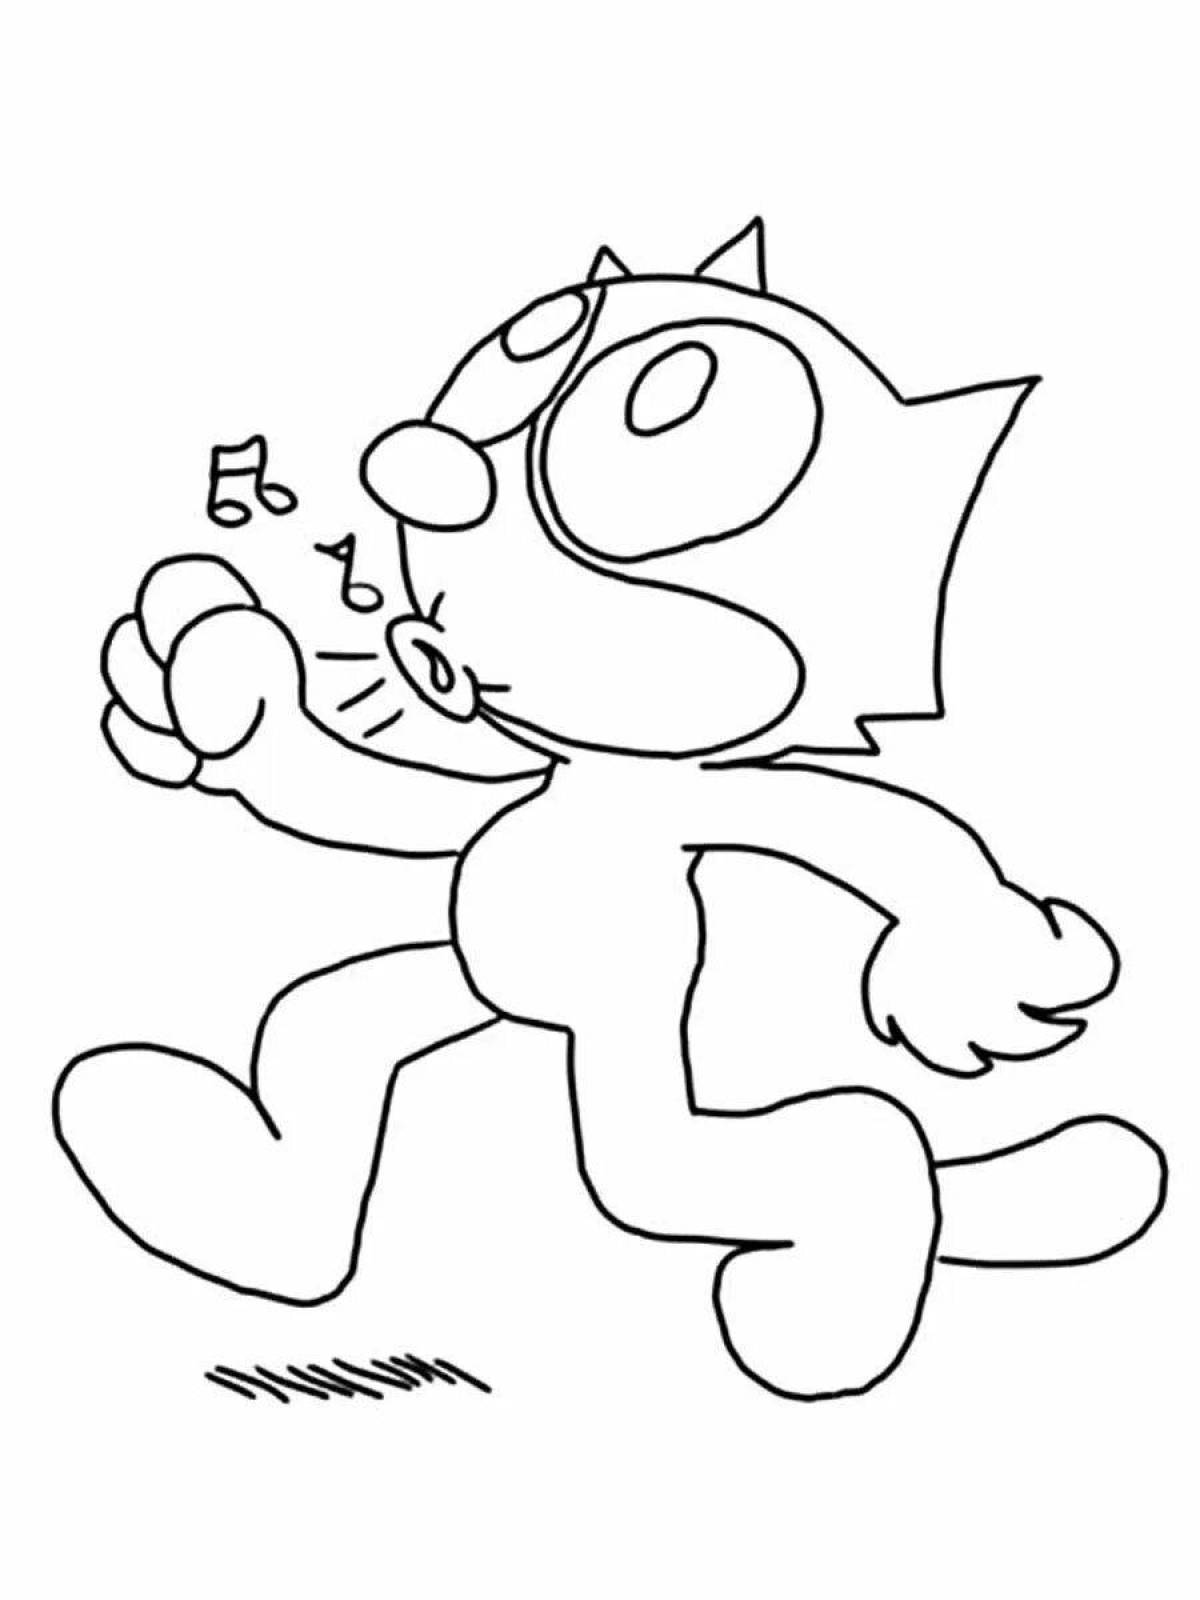 Animated cat card coloring page